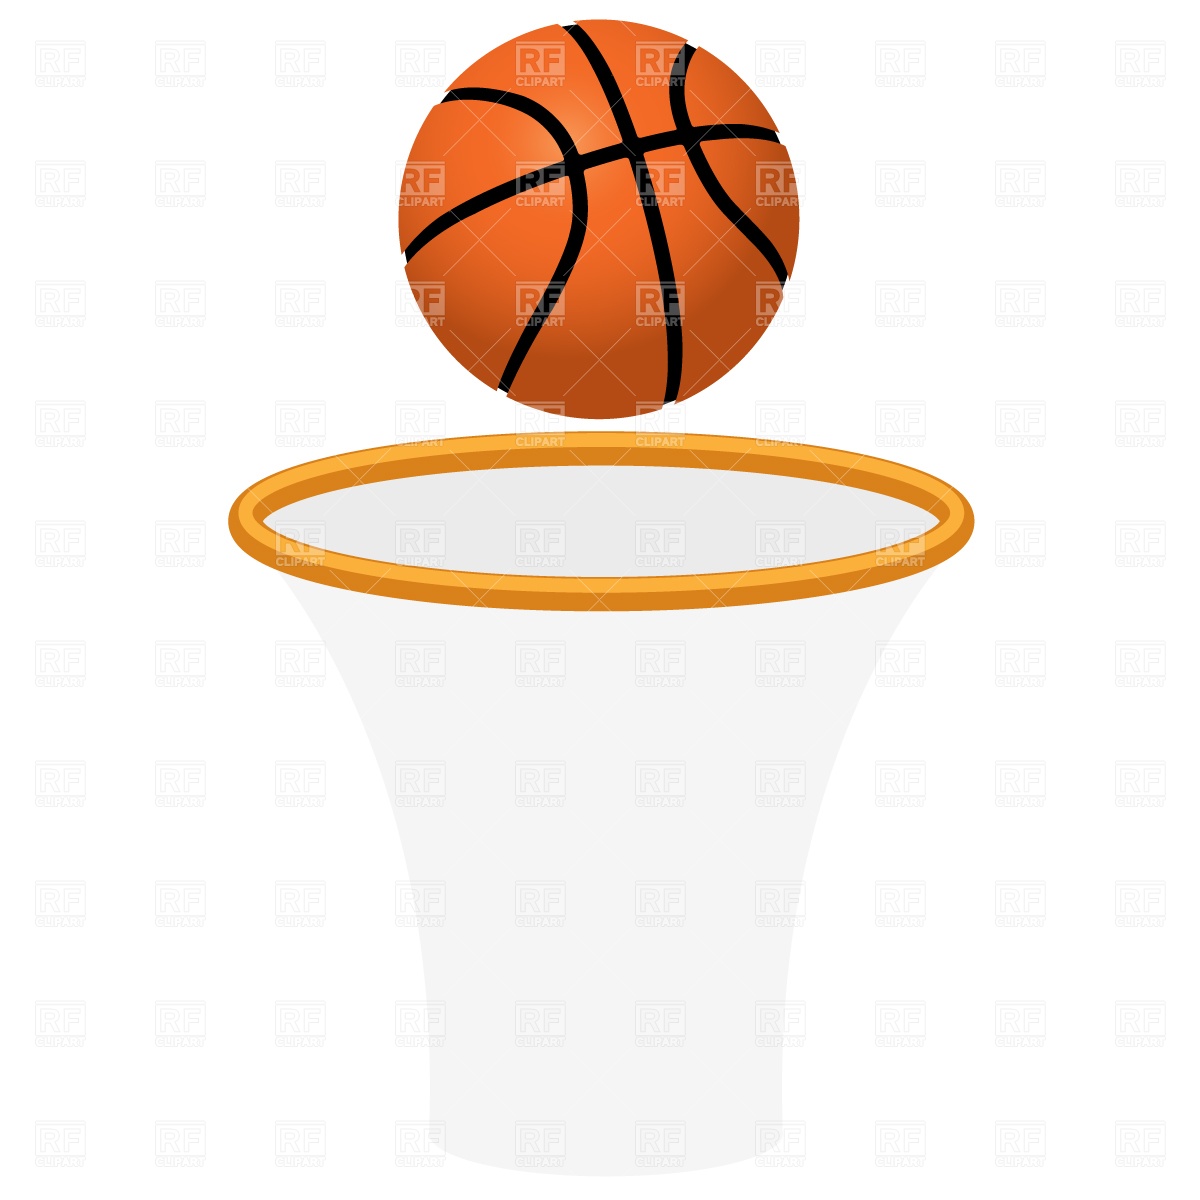 Basketball Hoop Net And Ball Download Royalty Free Vector Clipart